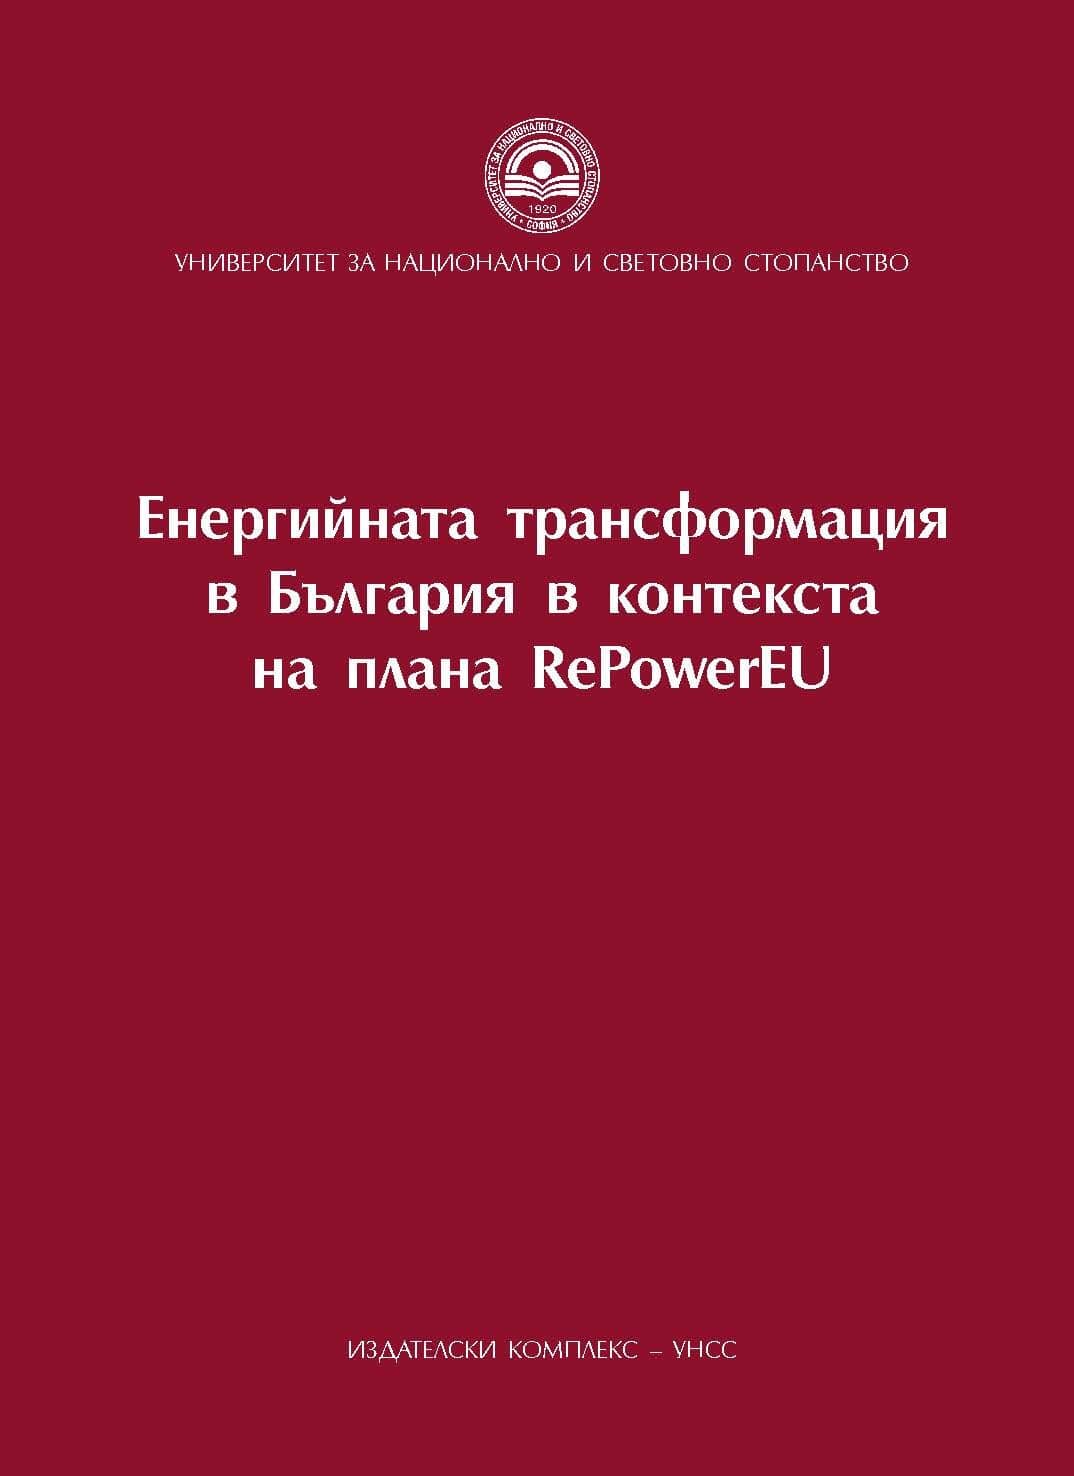 RePowerEU and the new generation of technology for management and control in the sectors transport and energy Cover Image